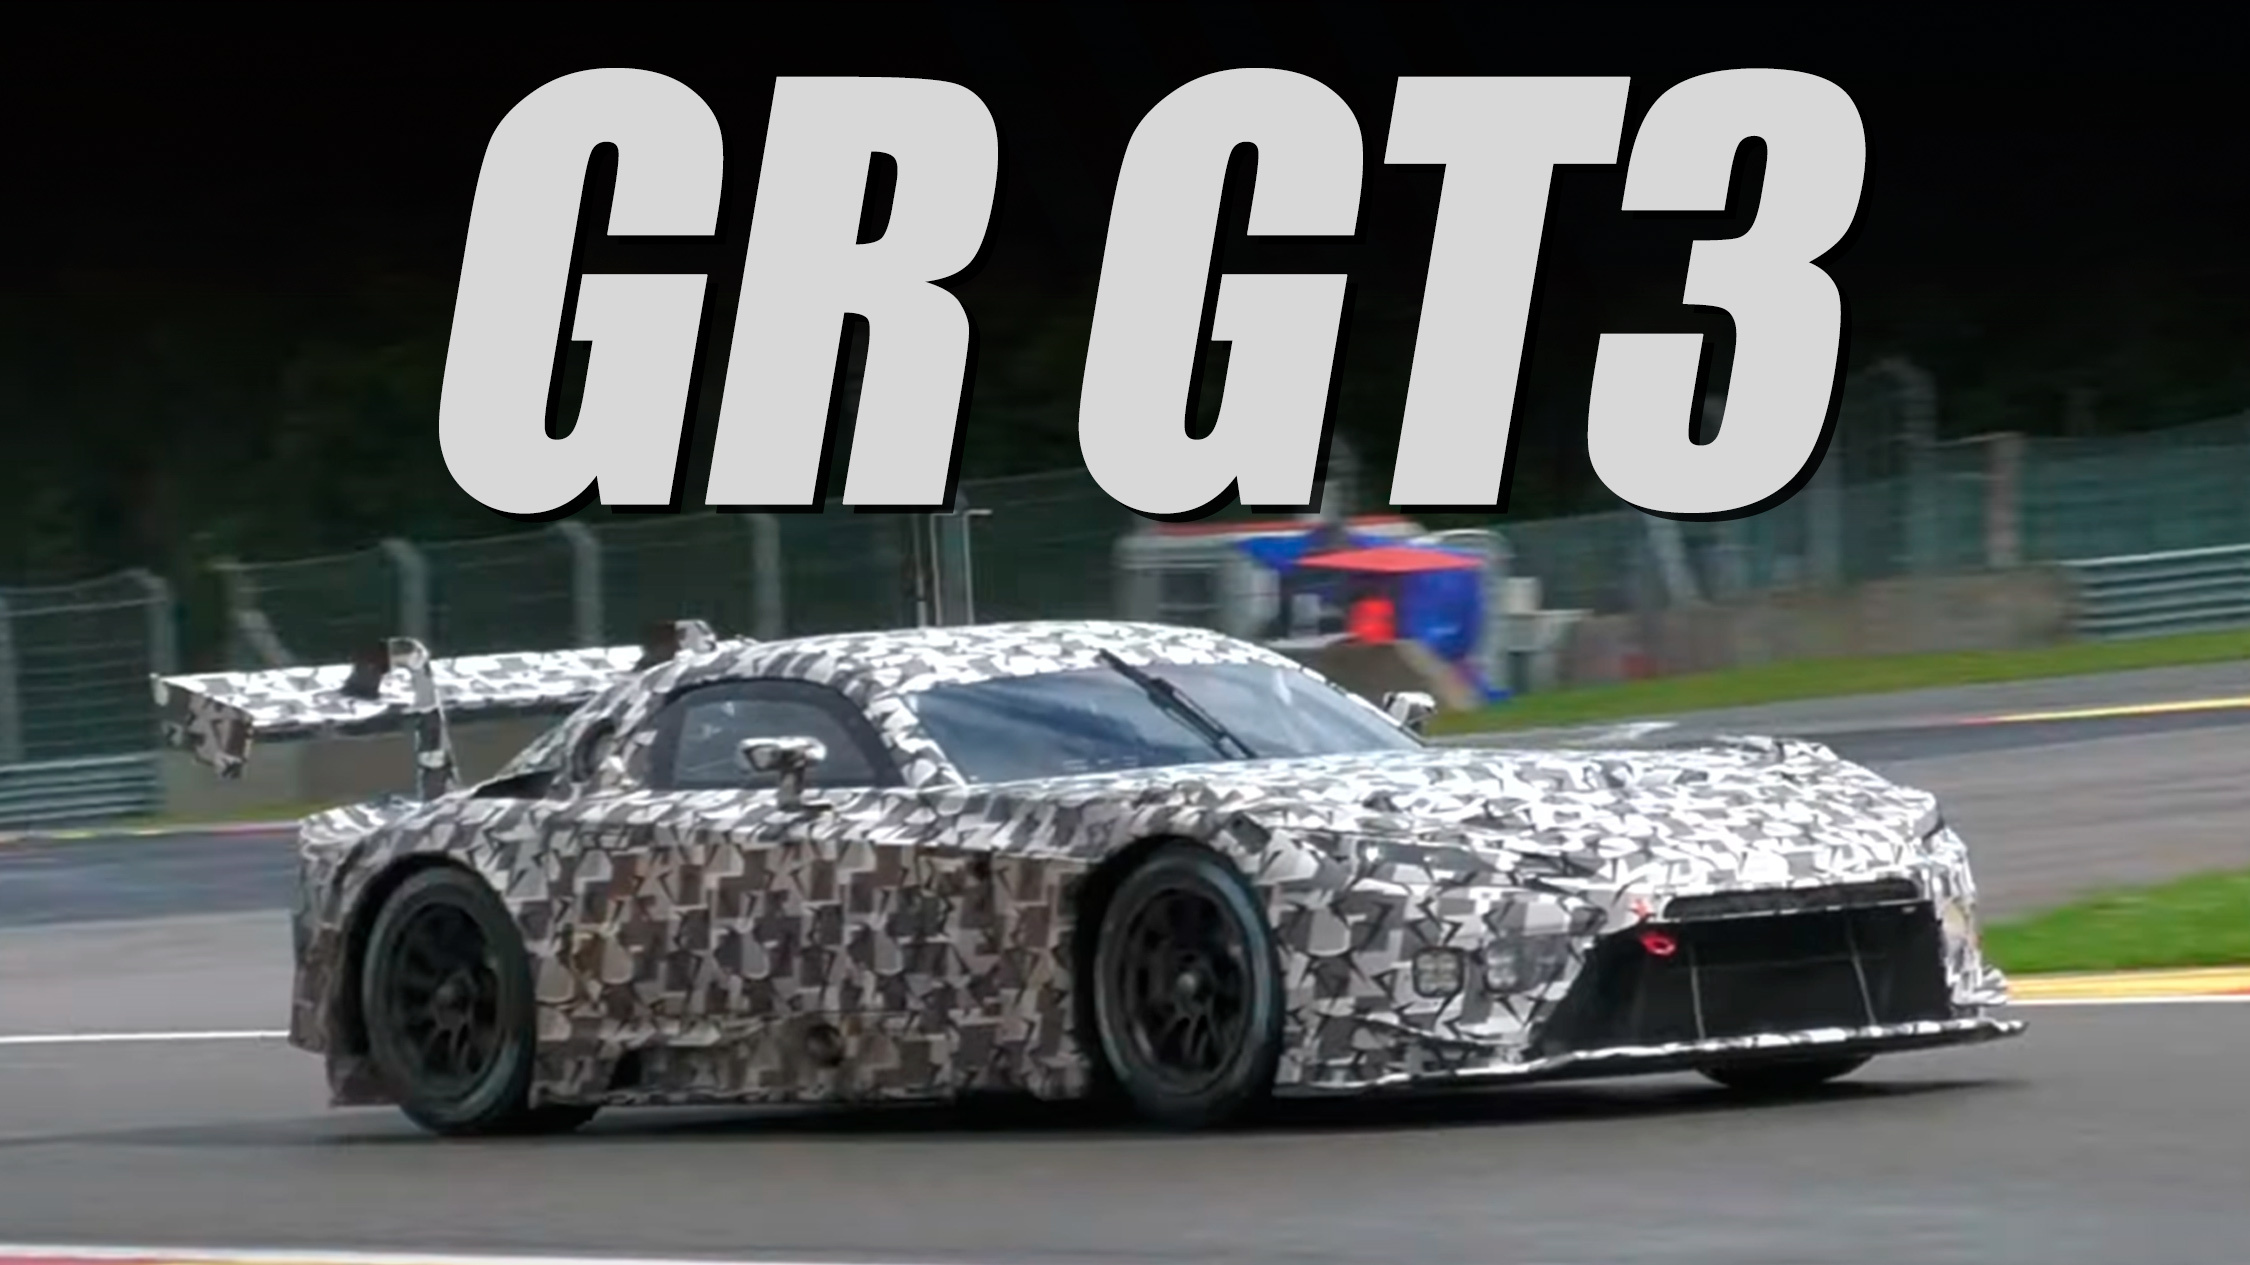 Toyota / Lexus GR GT3 Racer Takes To Spa With Twin-Turbo V8